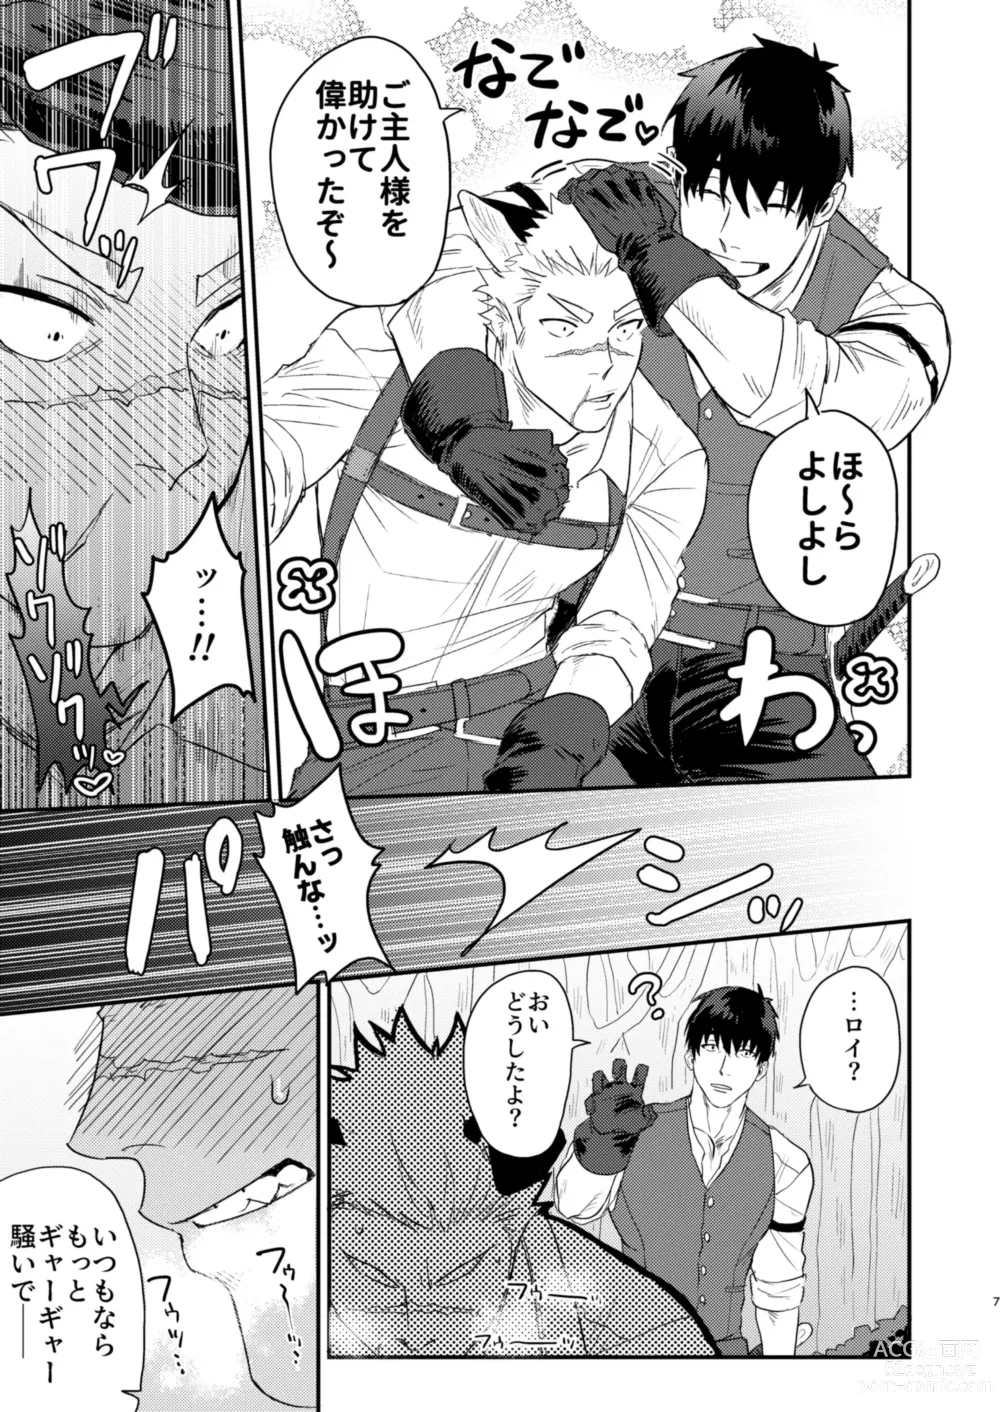 Page 4 of doujinshi It Looks like My Dog is in Heat